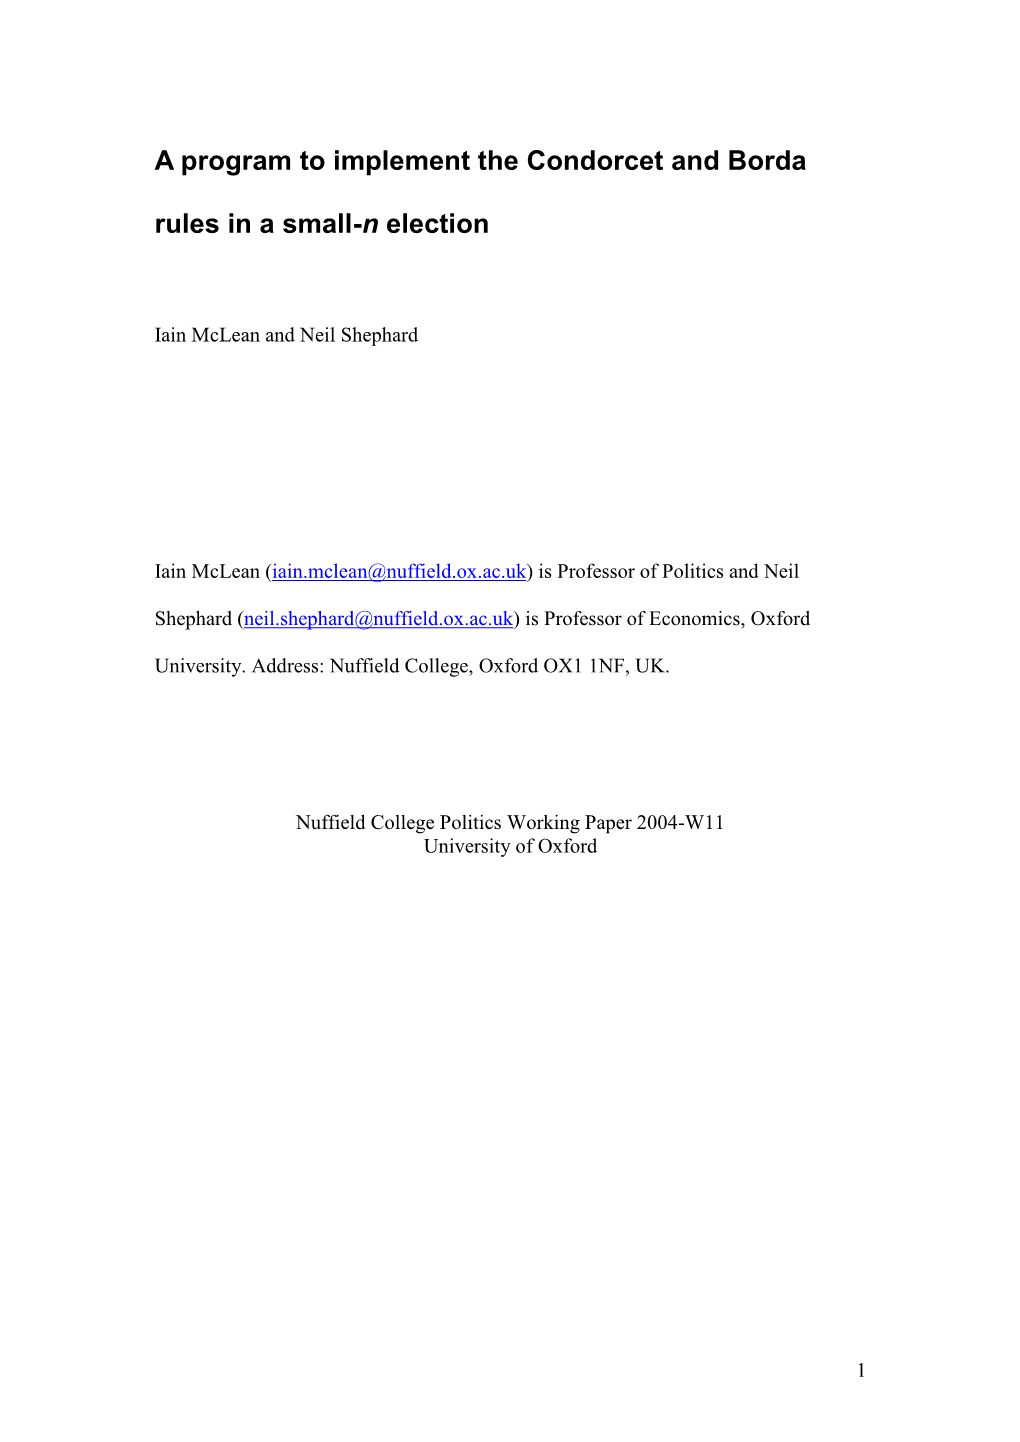 A Program to Implement the Condorcet and Borda Rules in a Small-N Election